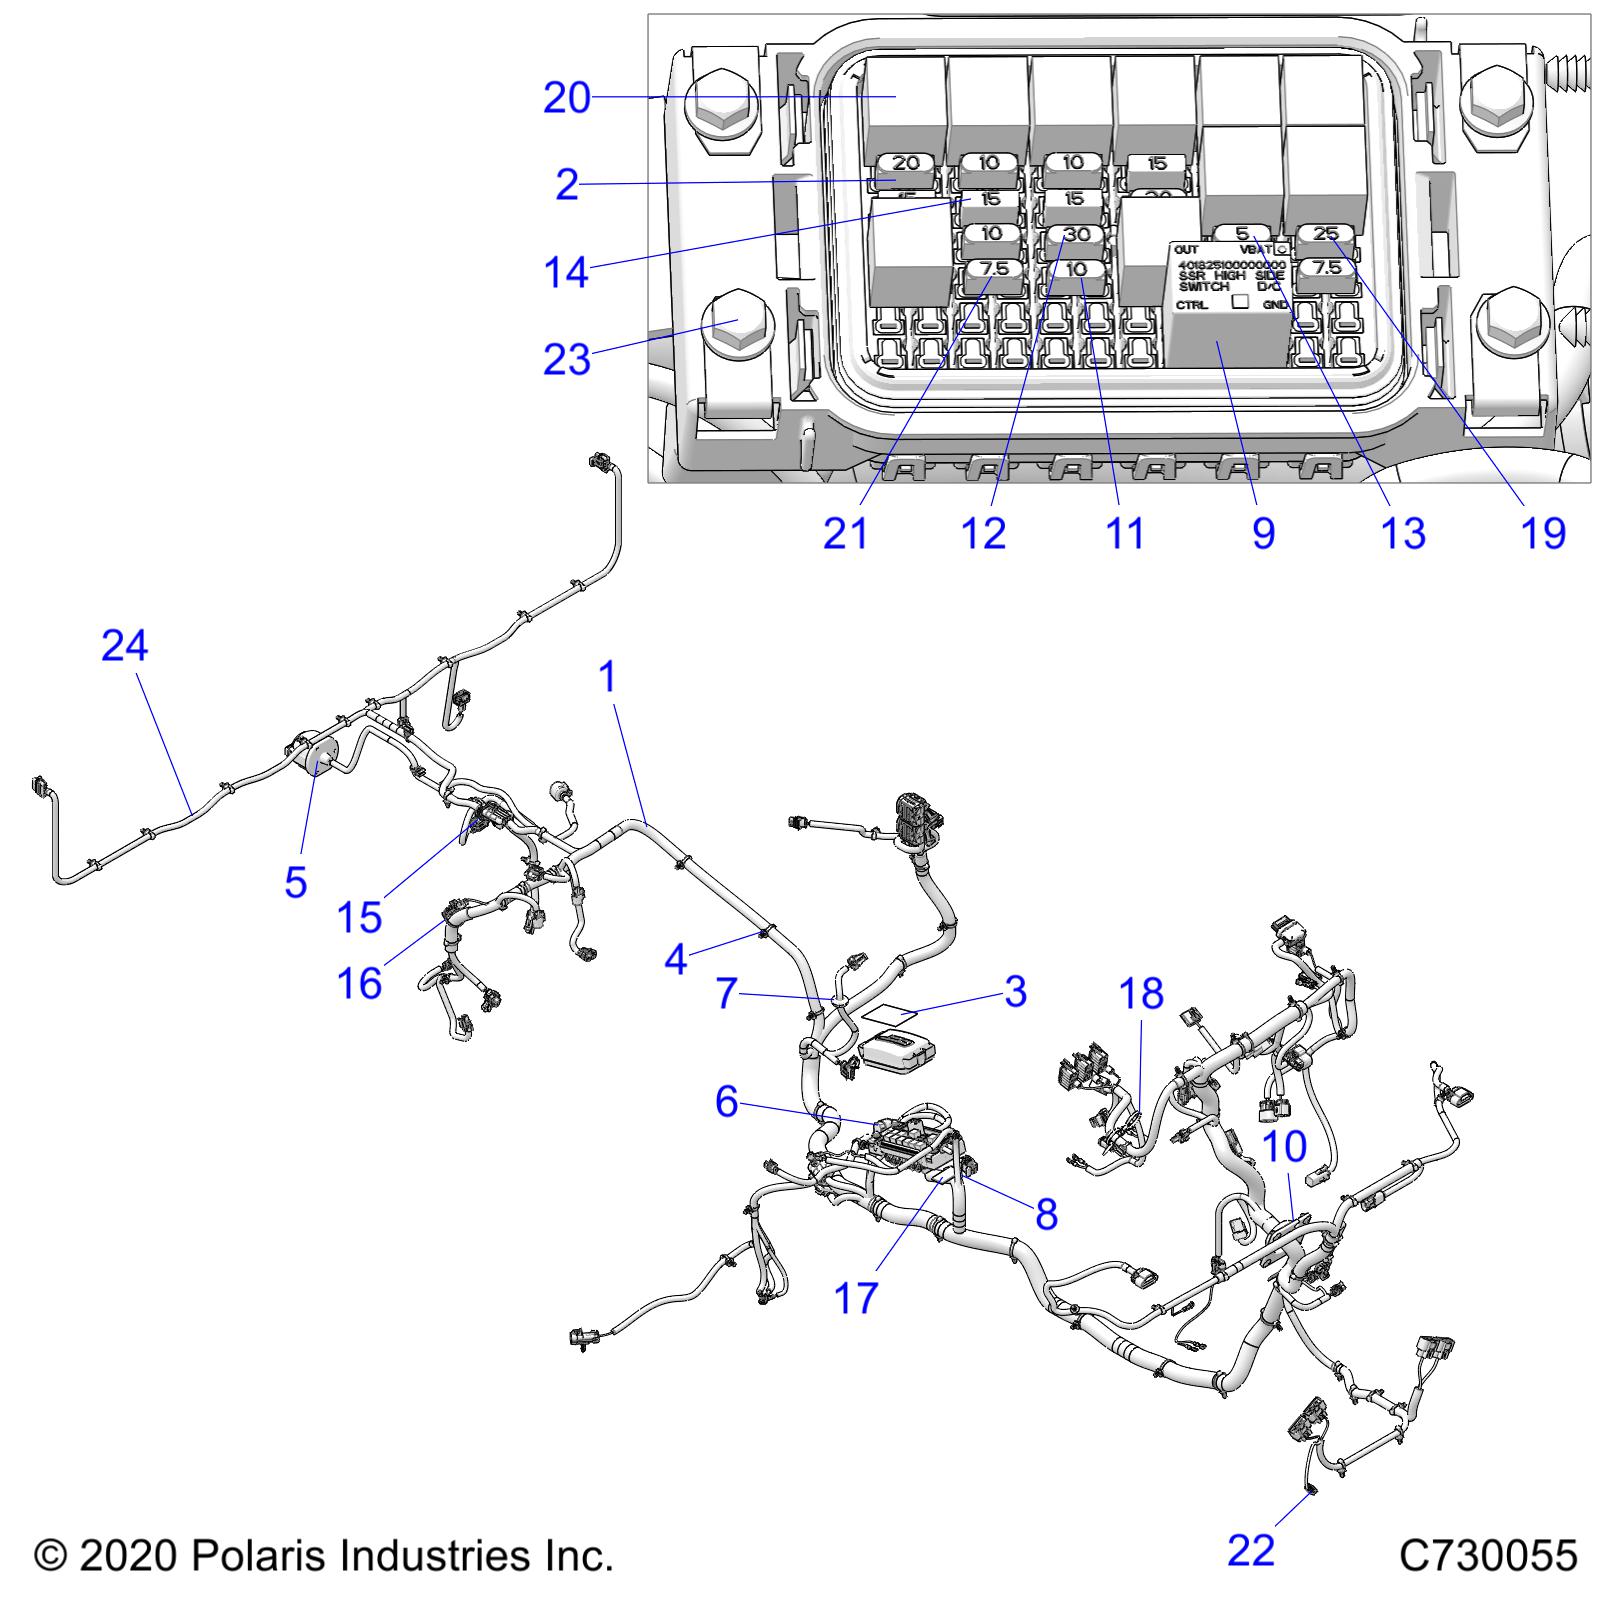 Part Number : 2415508 HARNESS-CHASSIS PS TRC NORDIC